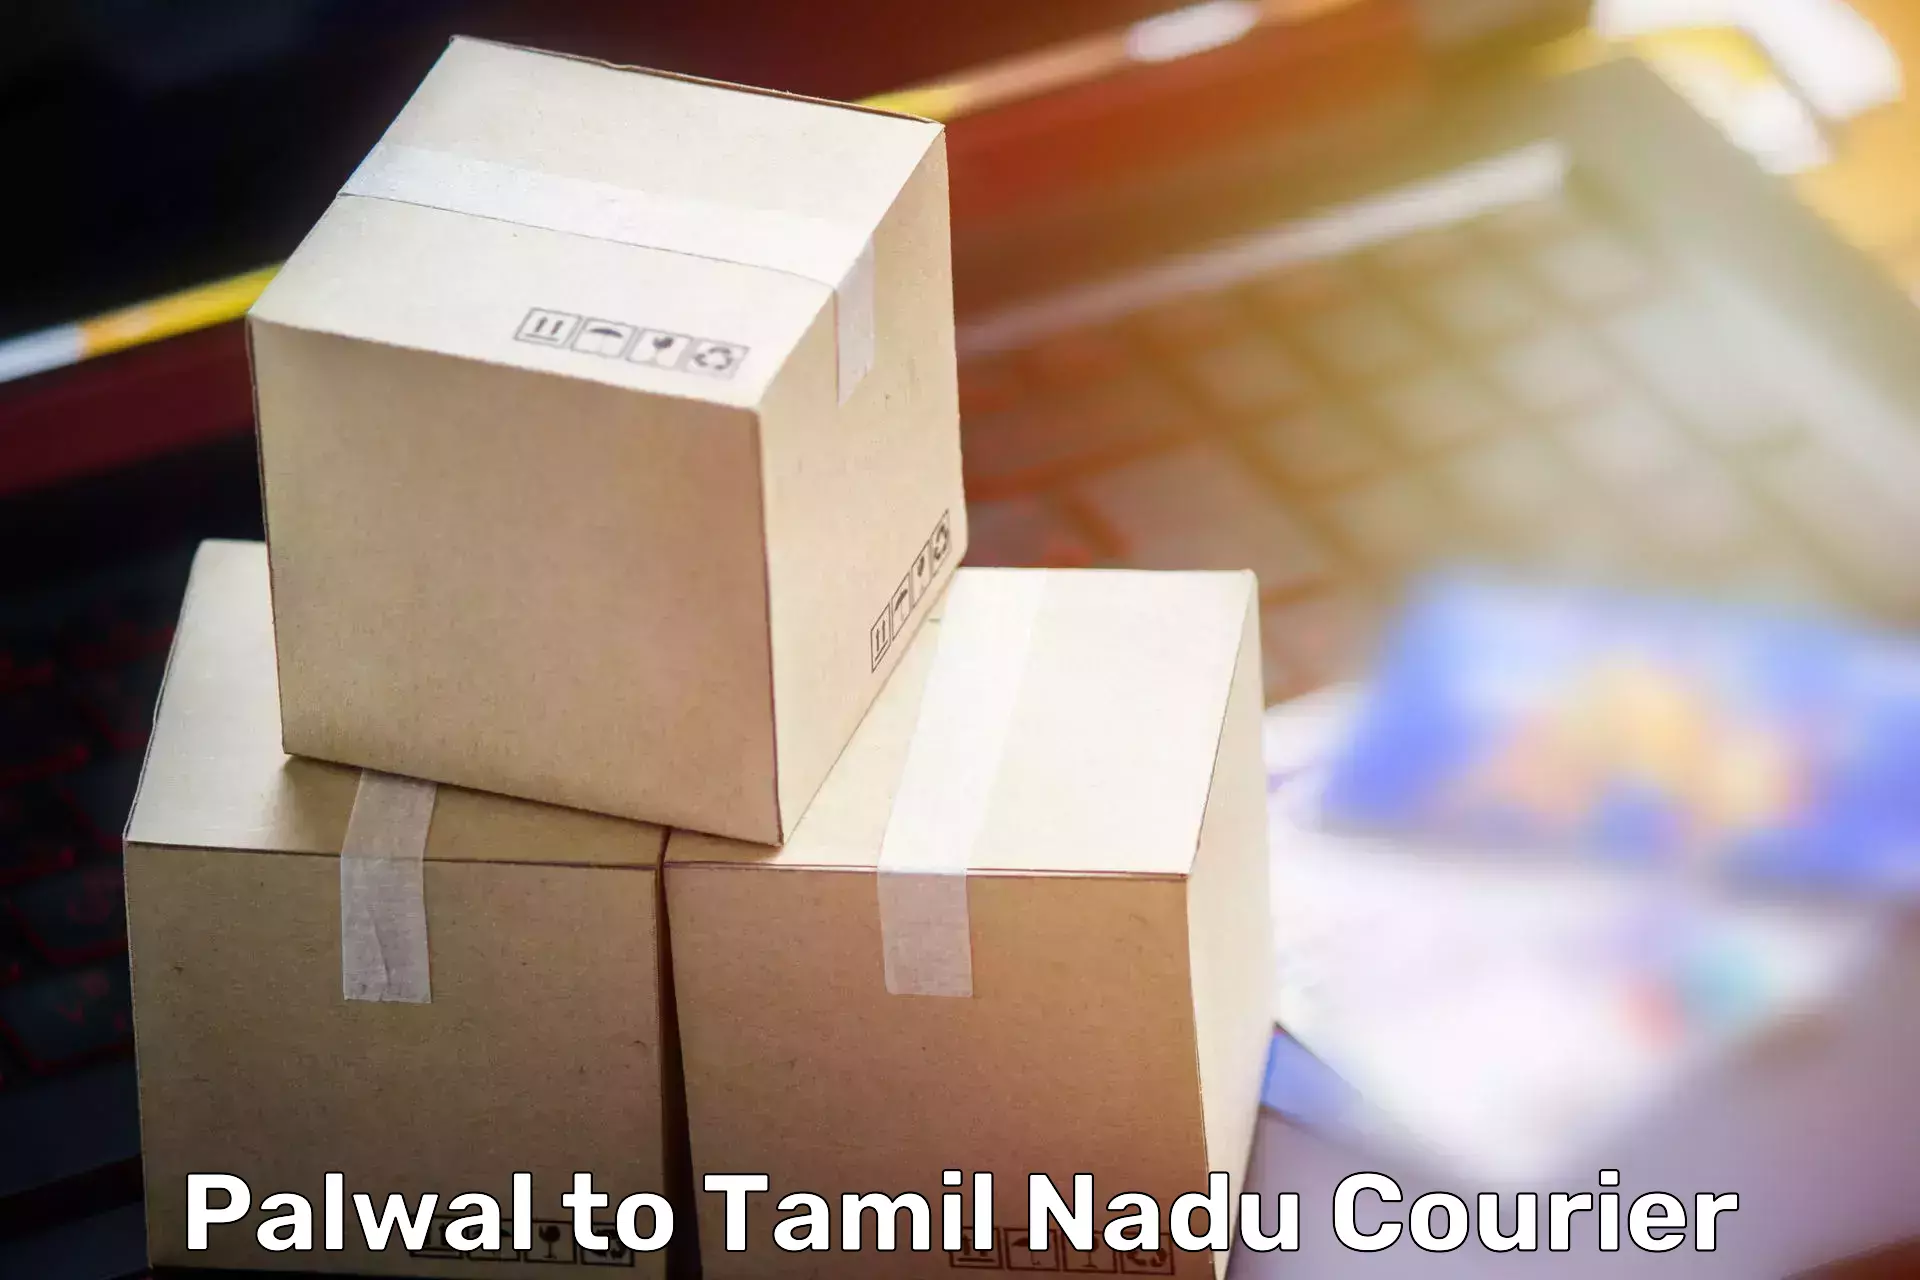 Household goods transport service Palwal to Tamil Nadu